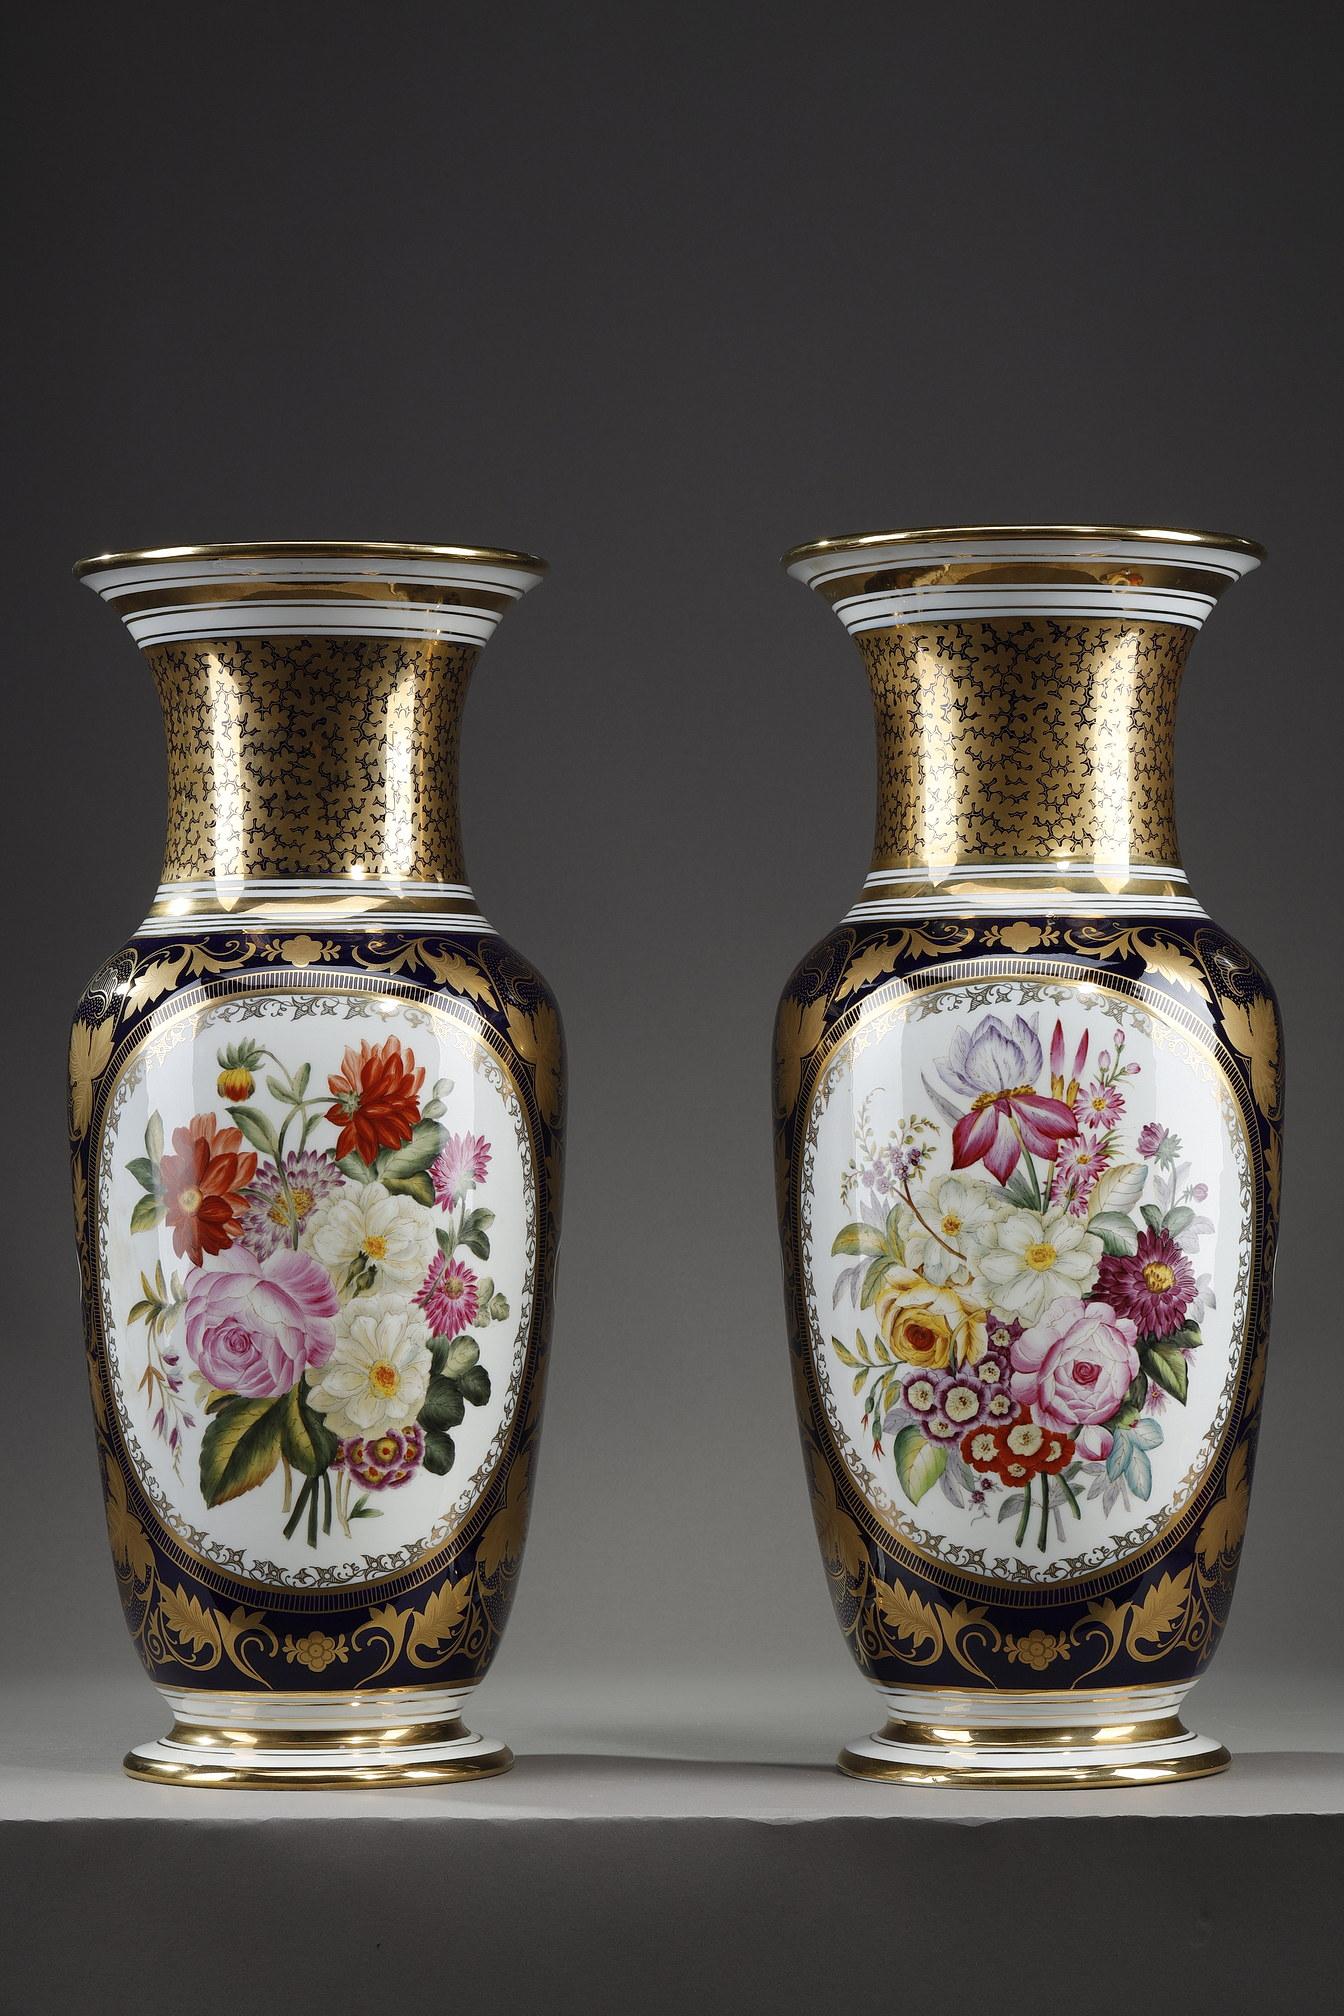 Pair of Bayeux porcelain vases of baluster shape with flared neck. The body is decorated with a polychrome bouquet of flowers inscribed in a white oval reserve on one side and a stylized fleur-de-lis on the other. Blue background covered with vine